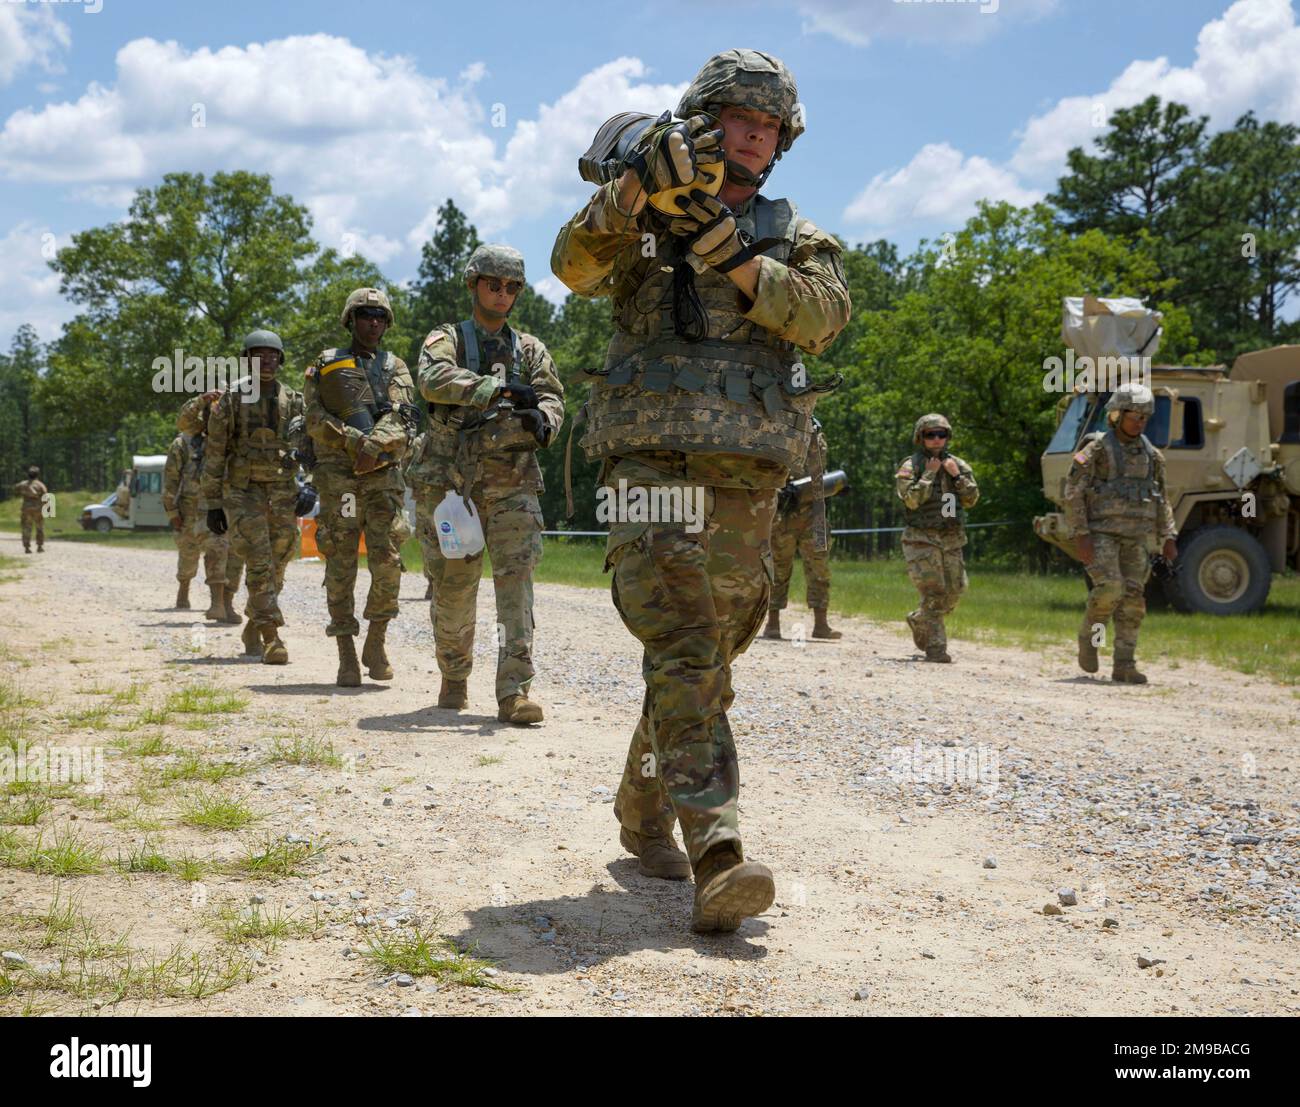 Soldiers with the 61st Troop Command carry explosives to the demolition site in Camp Shelby, Mississippi, May 15, 2022. Engineers conduct route clearance operations training to uncover improvised explosive devices in a controlled environment. Stock Photo